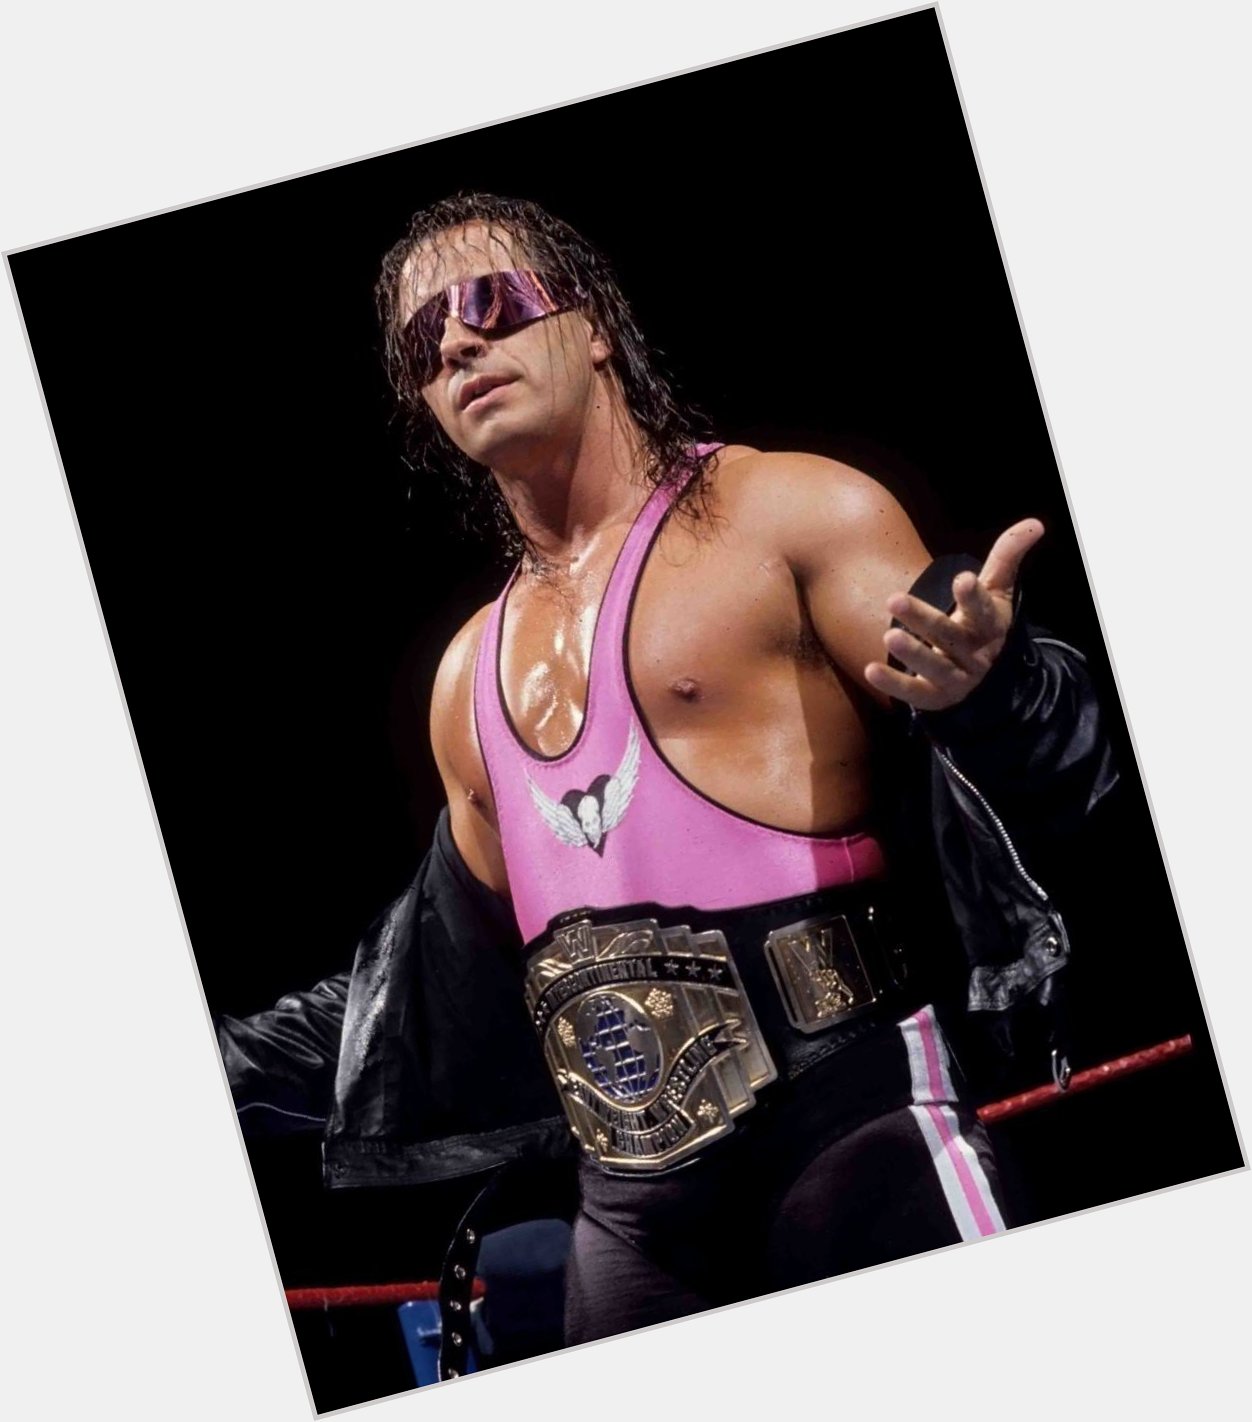 Happy birthday To The Greatest of All Time Bret hart 